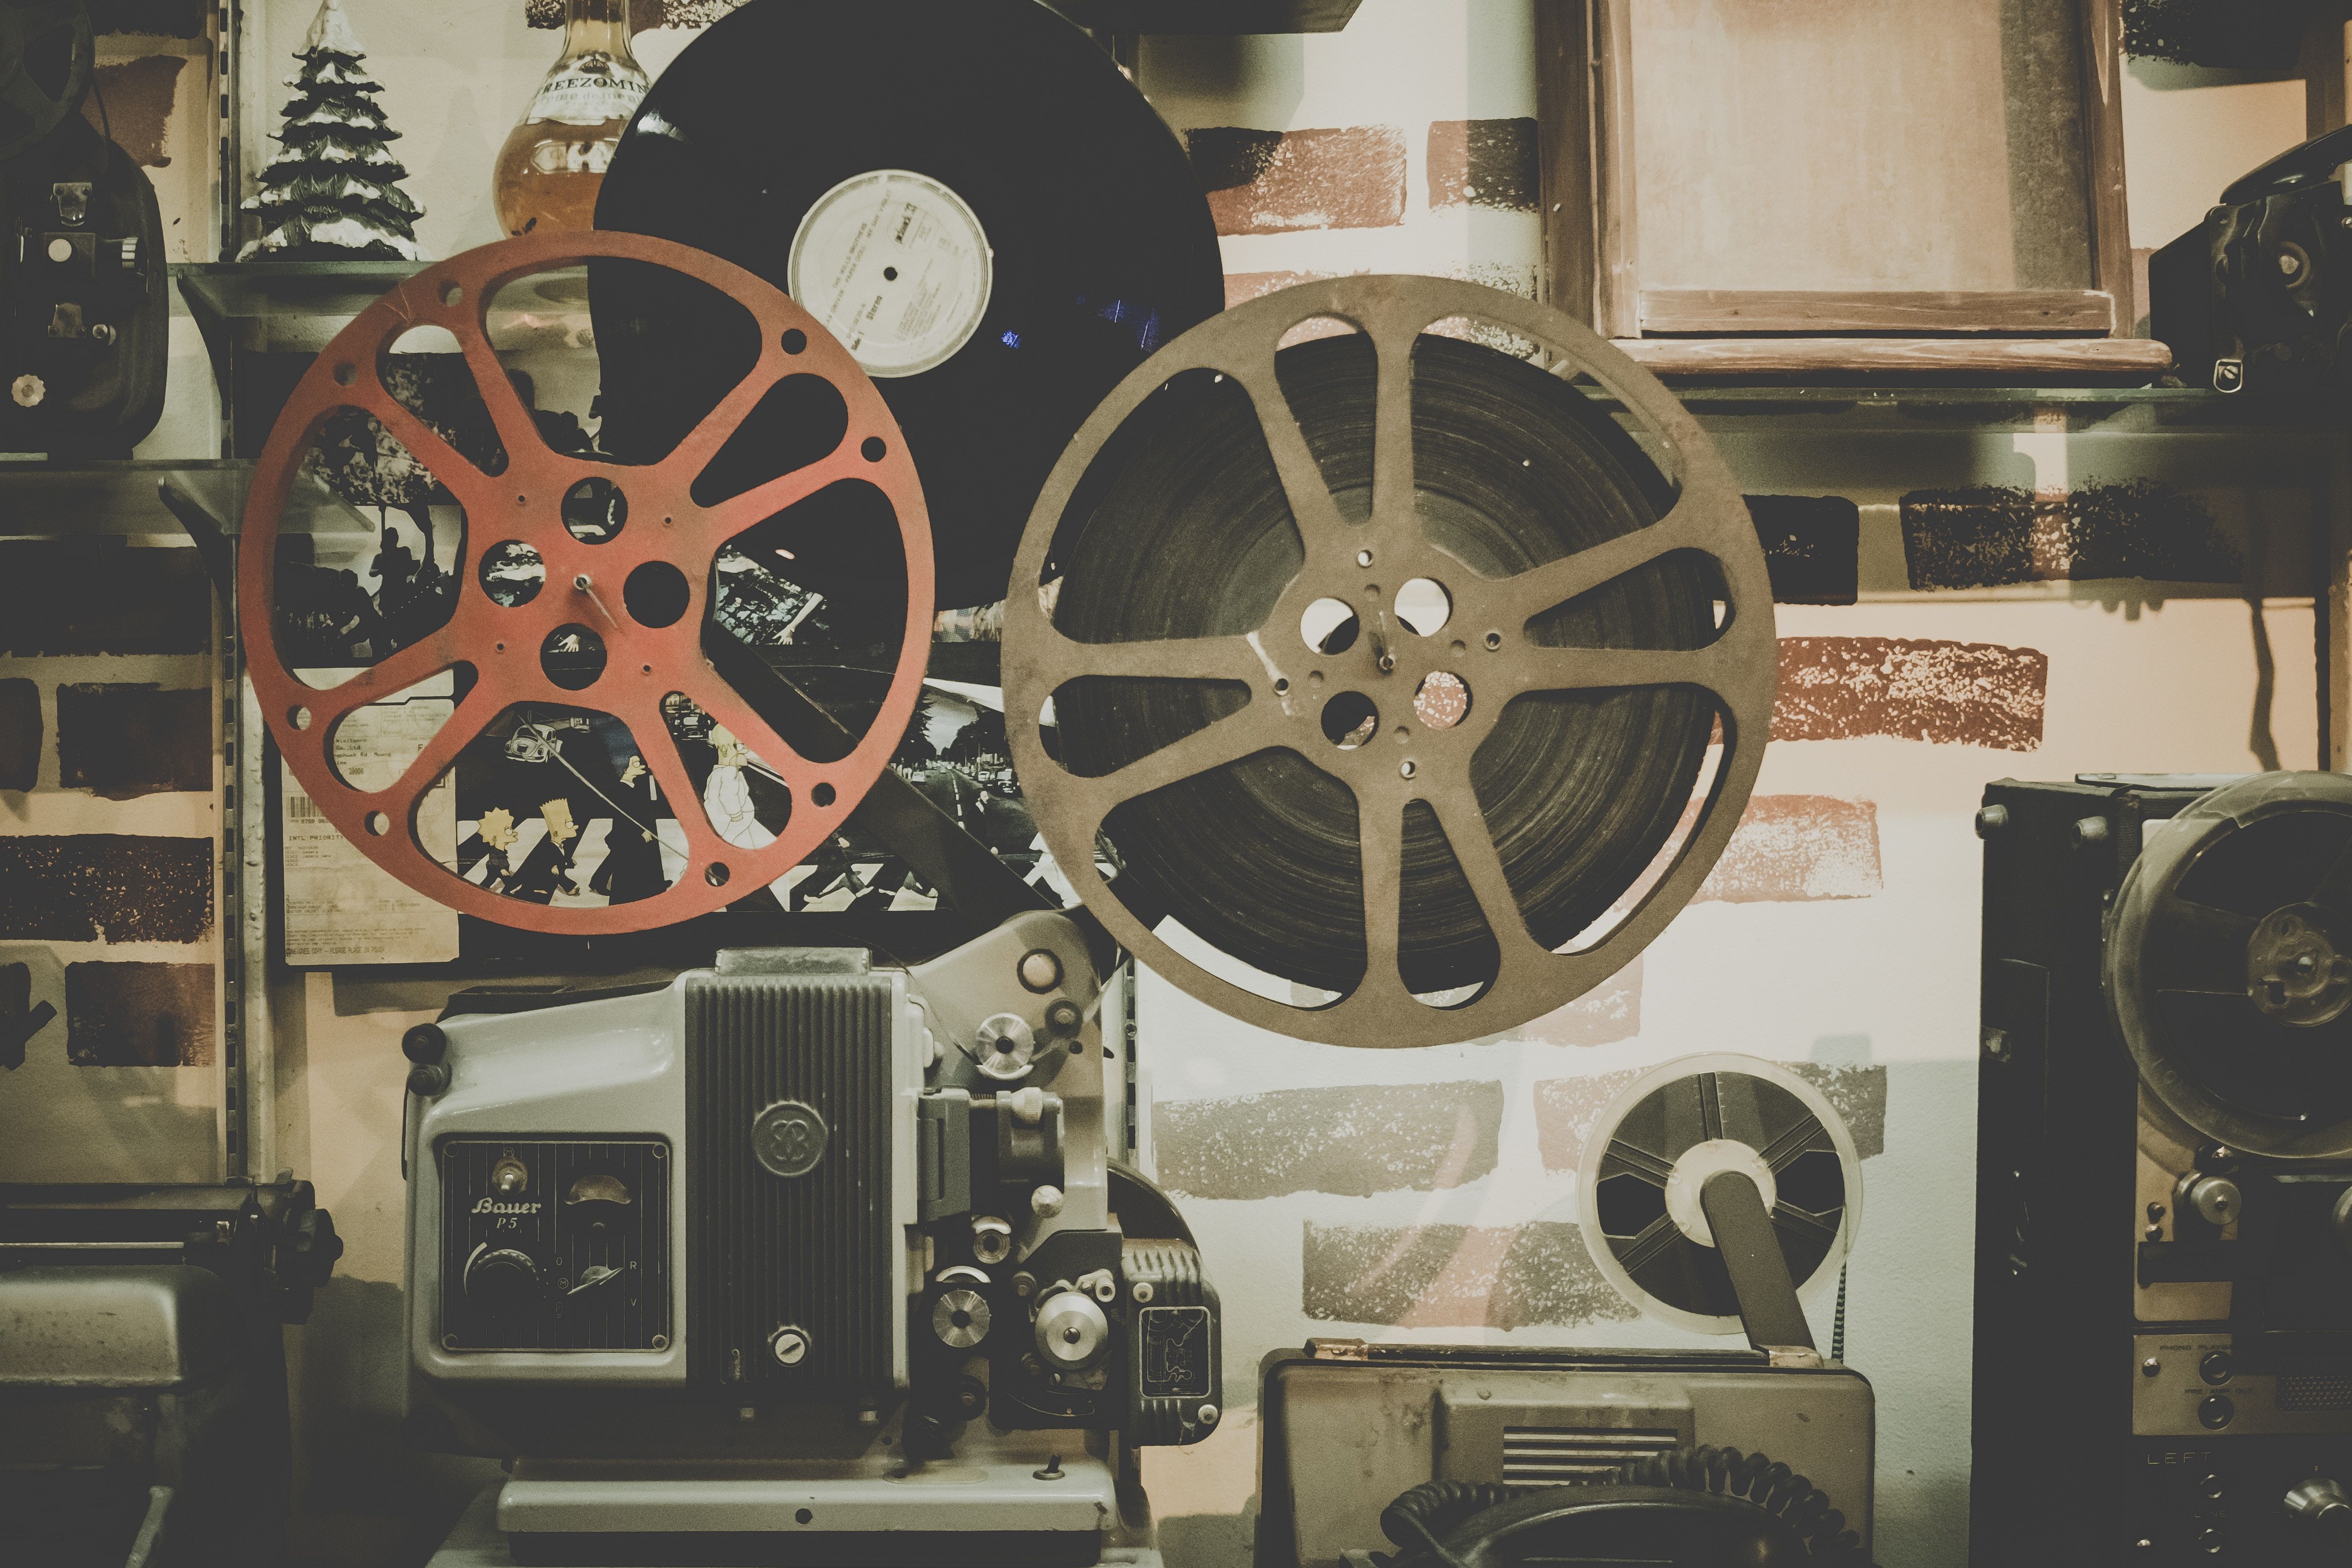 4896x3264 #technology, #antique, #projector, #vintage, #vinyl, #reel, #classic, #record, #tech, #movie, #film projector, #Creative Commons image, #old, #film, #symmetrical, #retro. Mocah.org HD Wallpaper